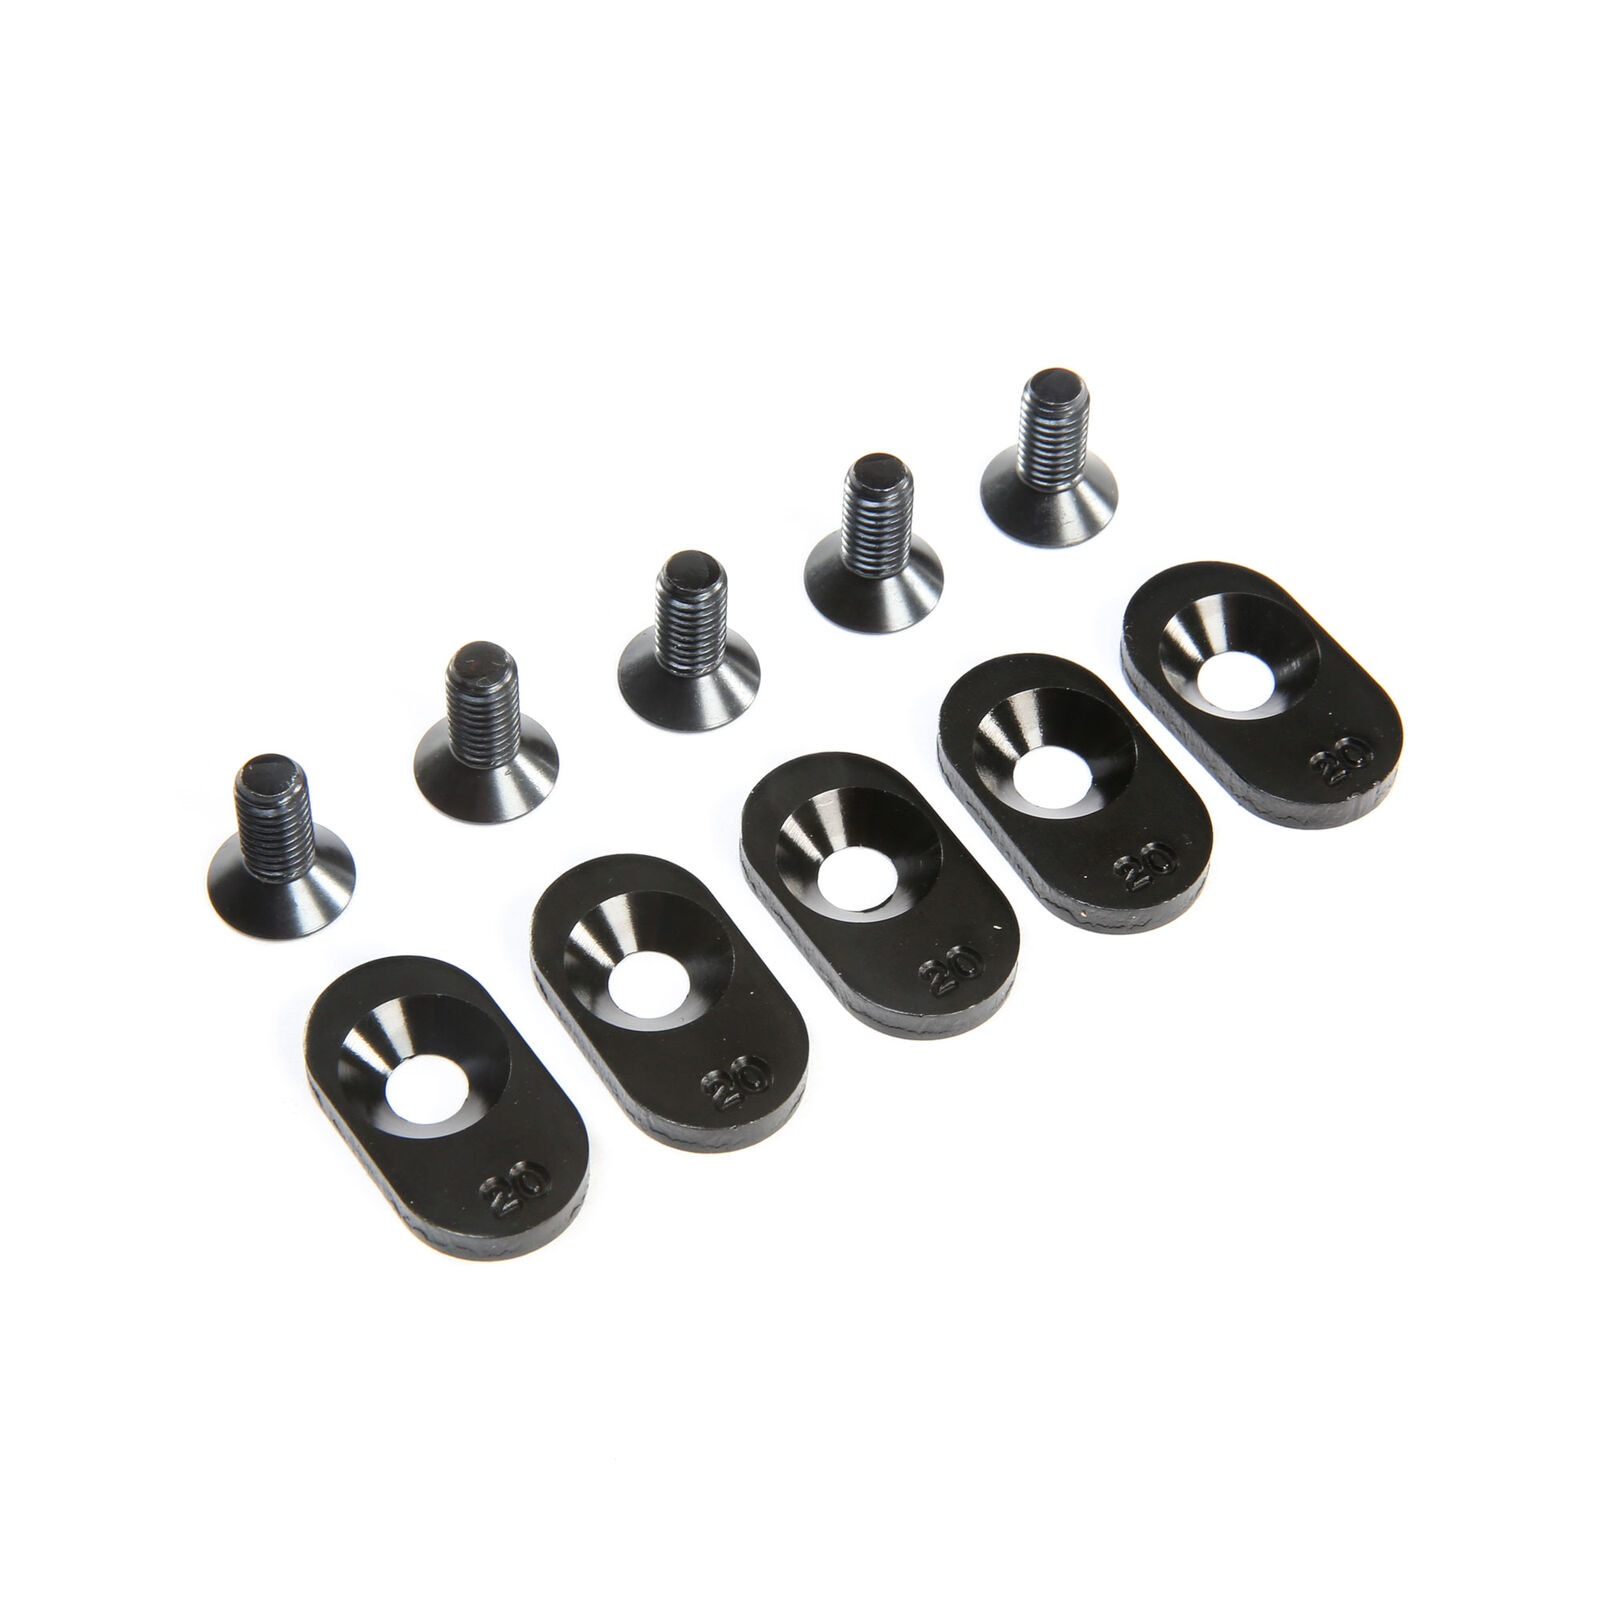 Engine Mount Insert and Screws 20T, Black (5): 5ive-T 2.0 (fits 62T spur)